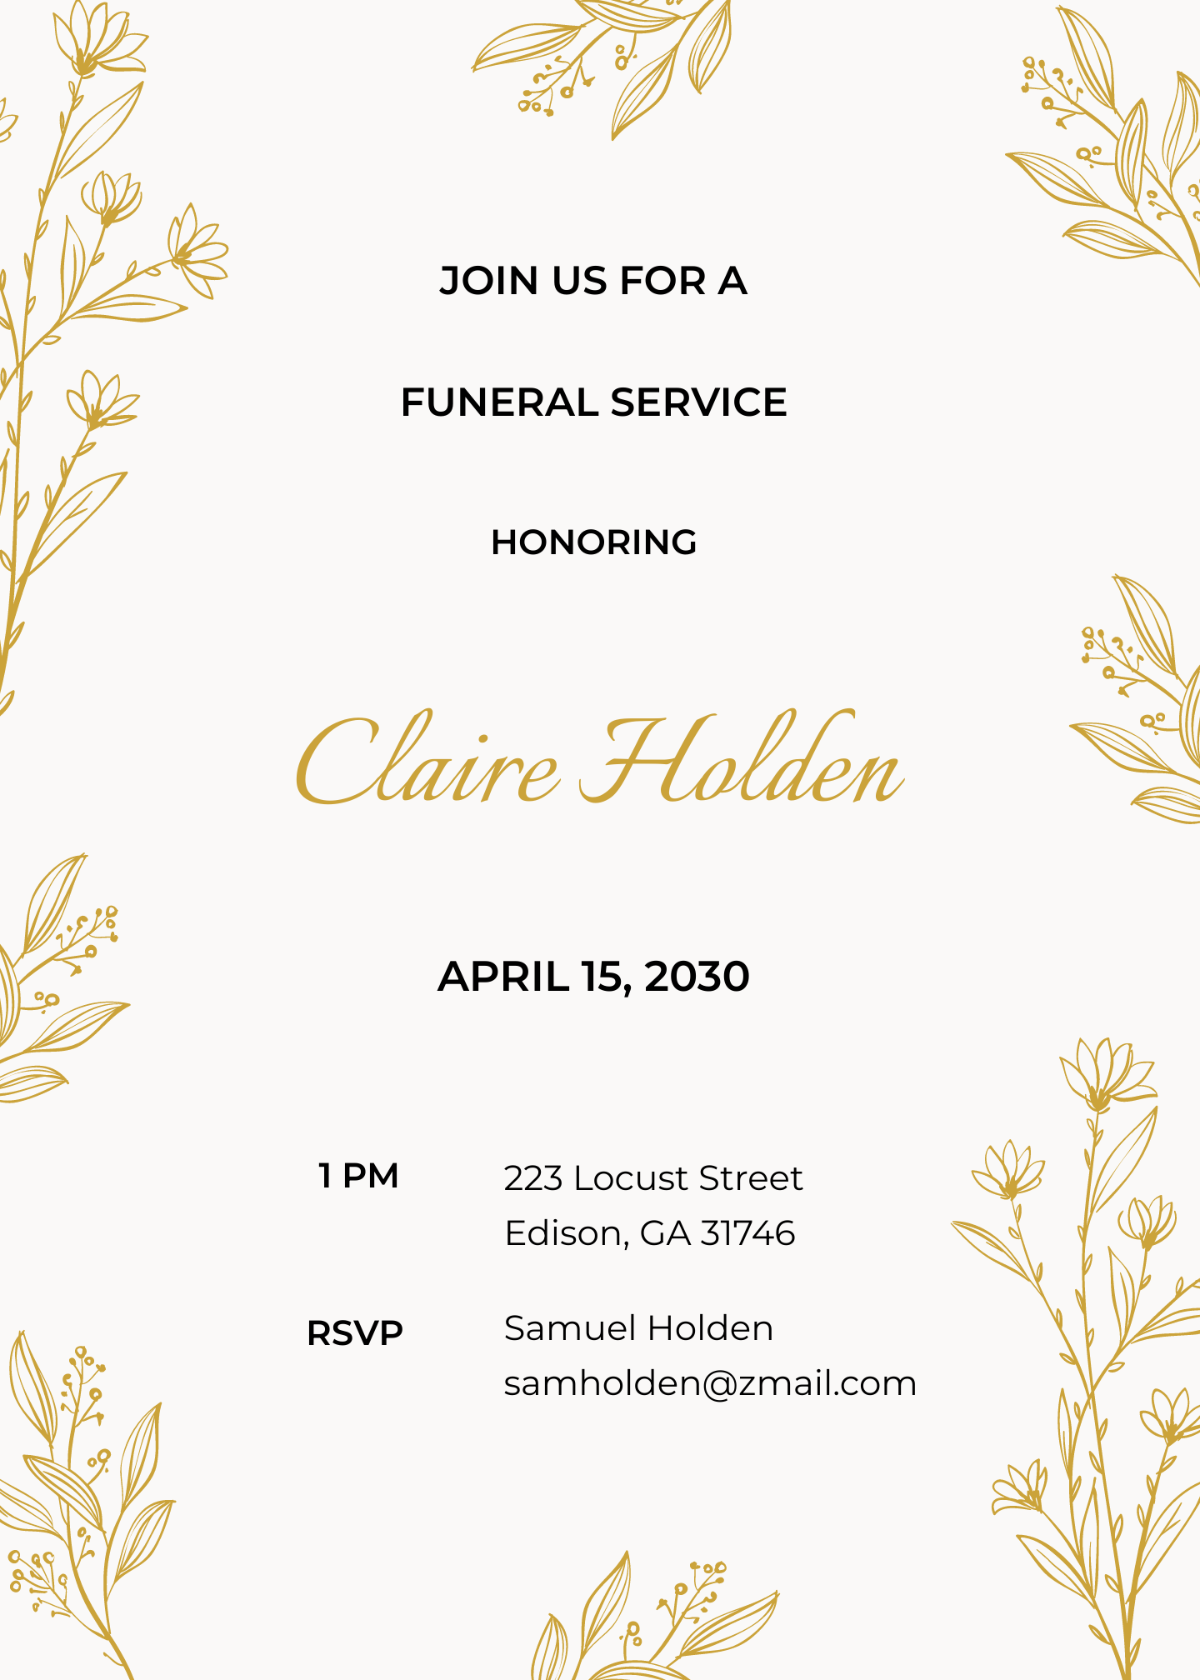 Floral Email Funeral Invitation Template